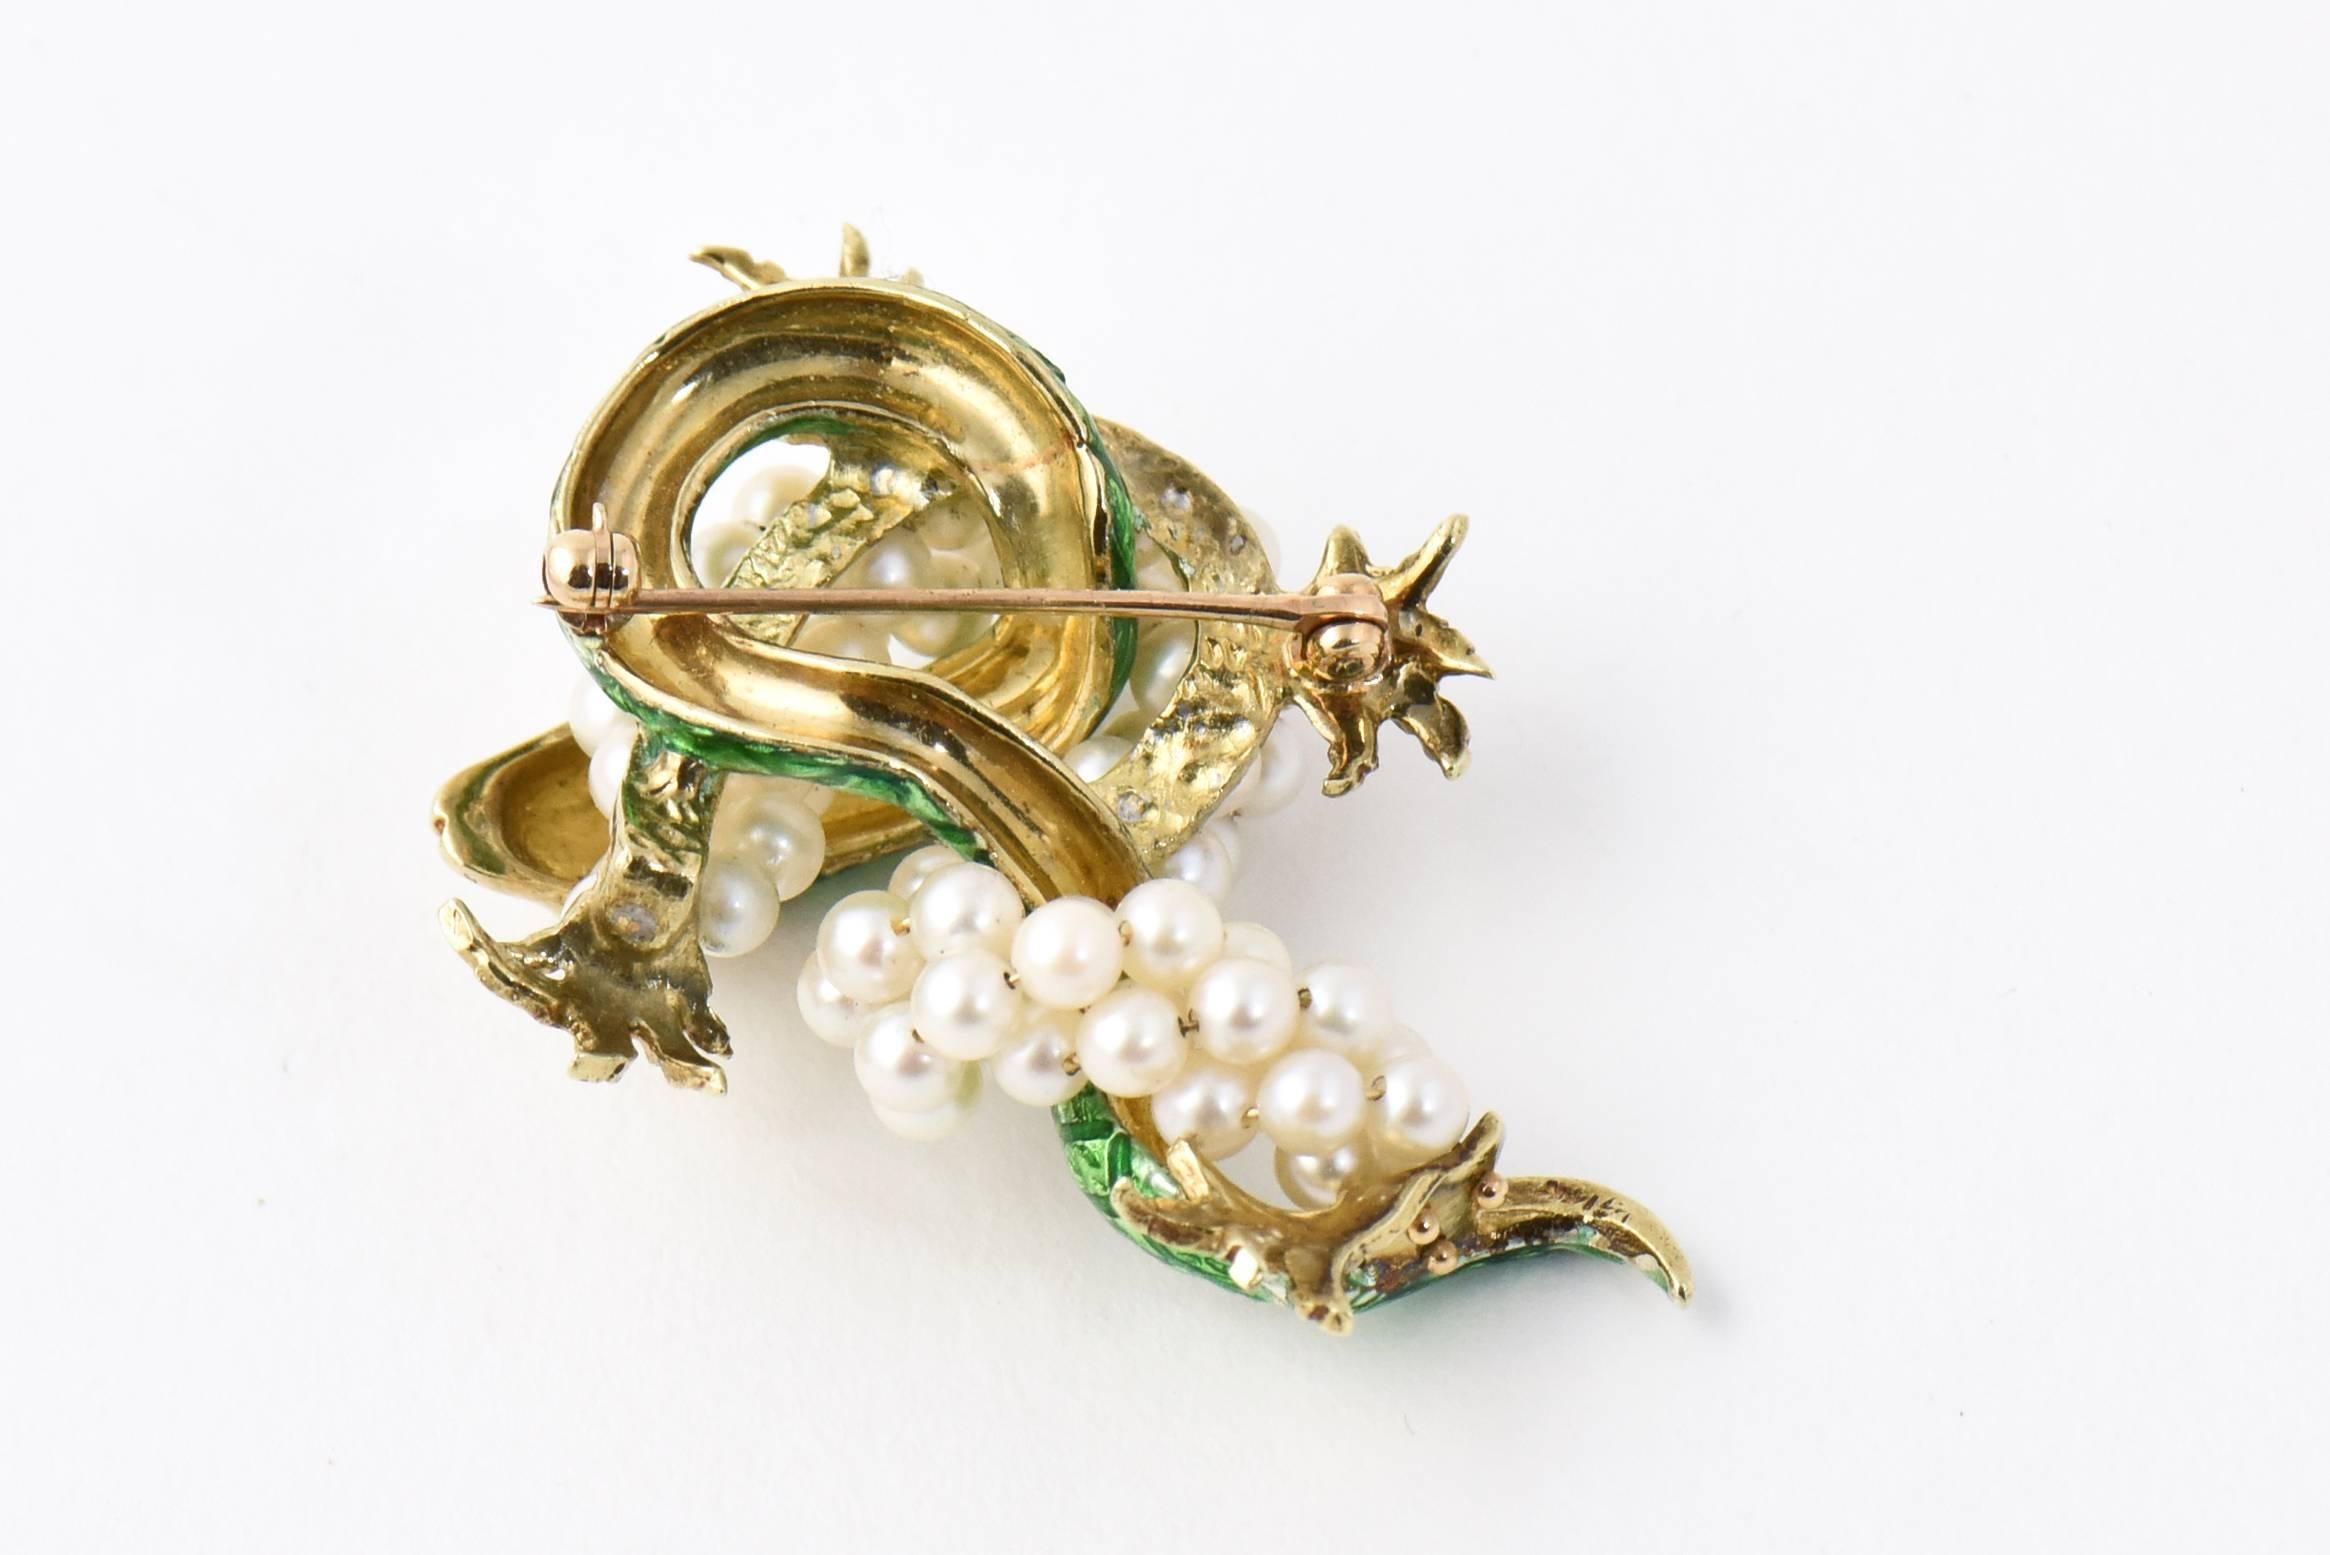 Beautiful green enamel and 14k yellow gold snake slithering through pearl and gold vines. 